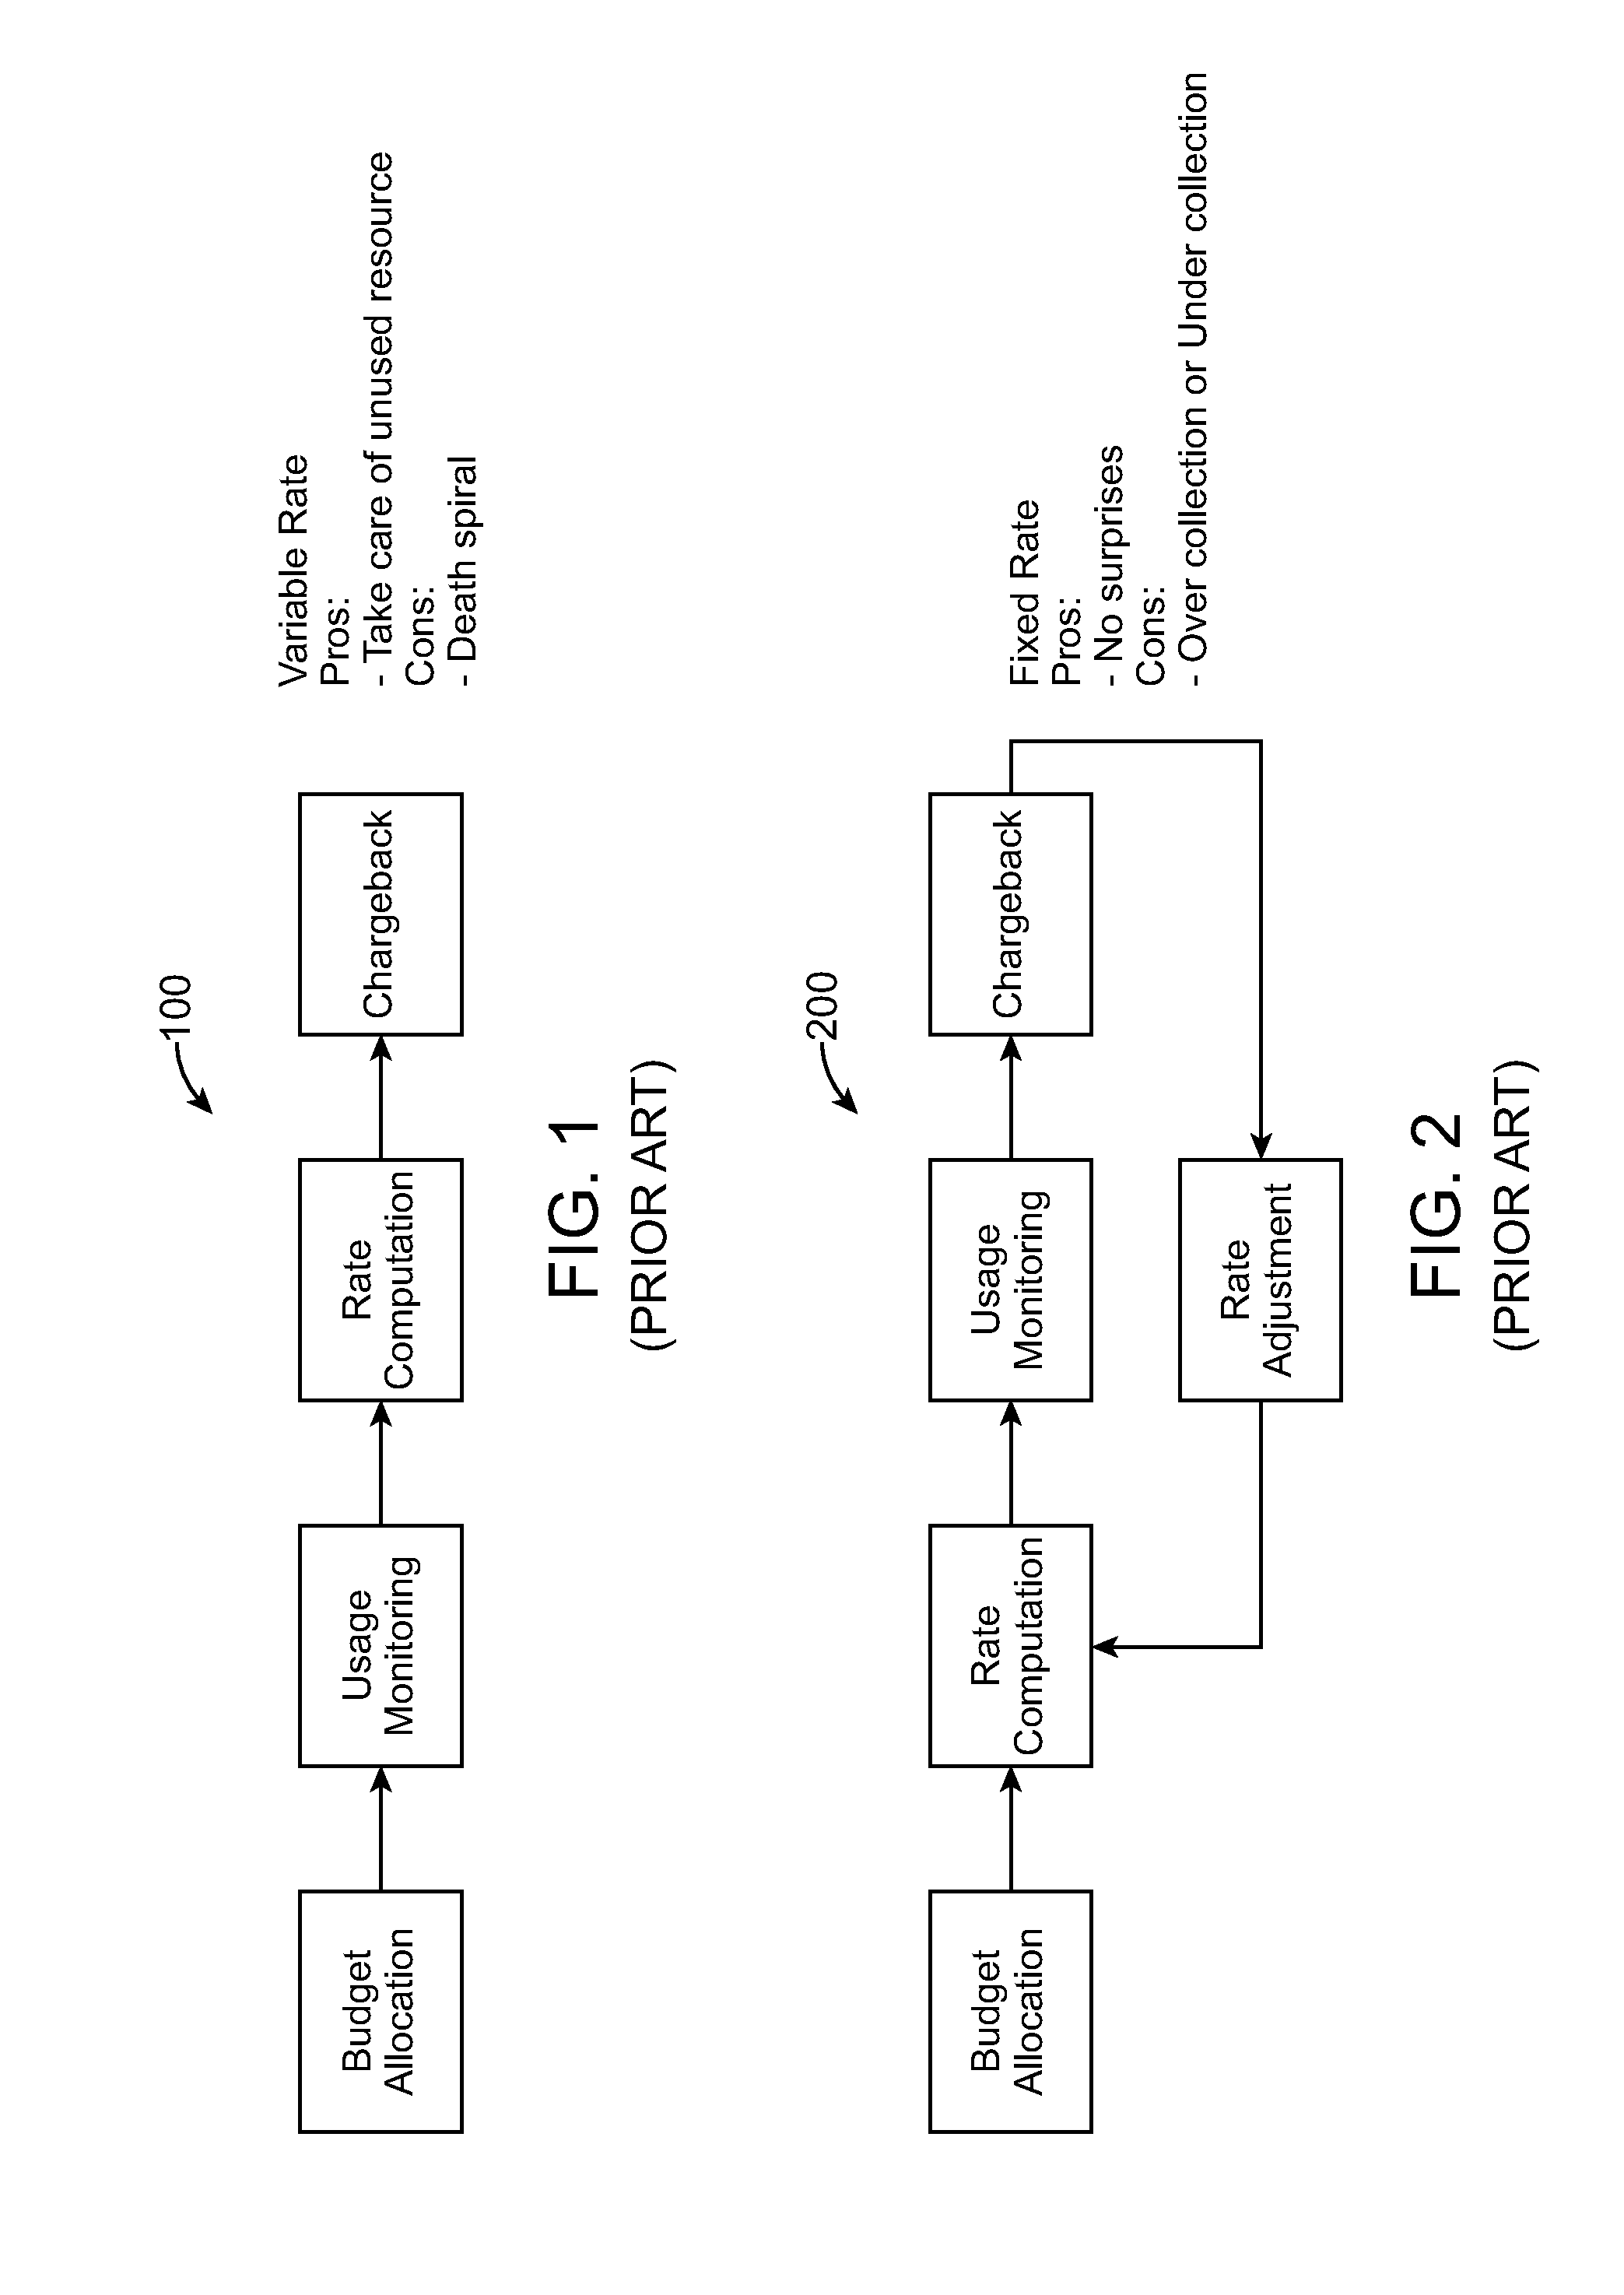 Method and system for chargeback allocation in information technology systems